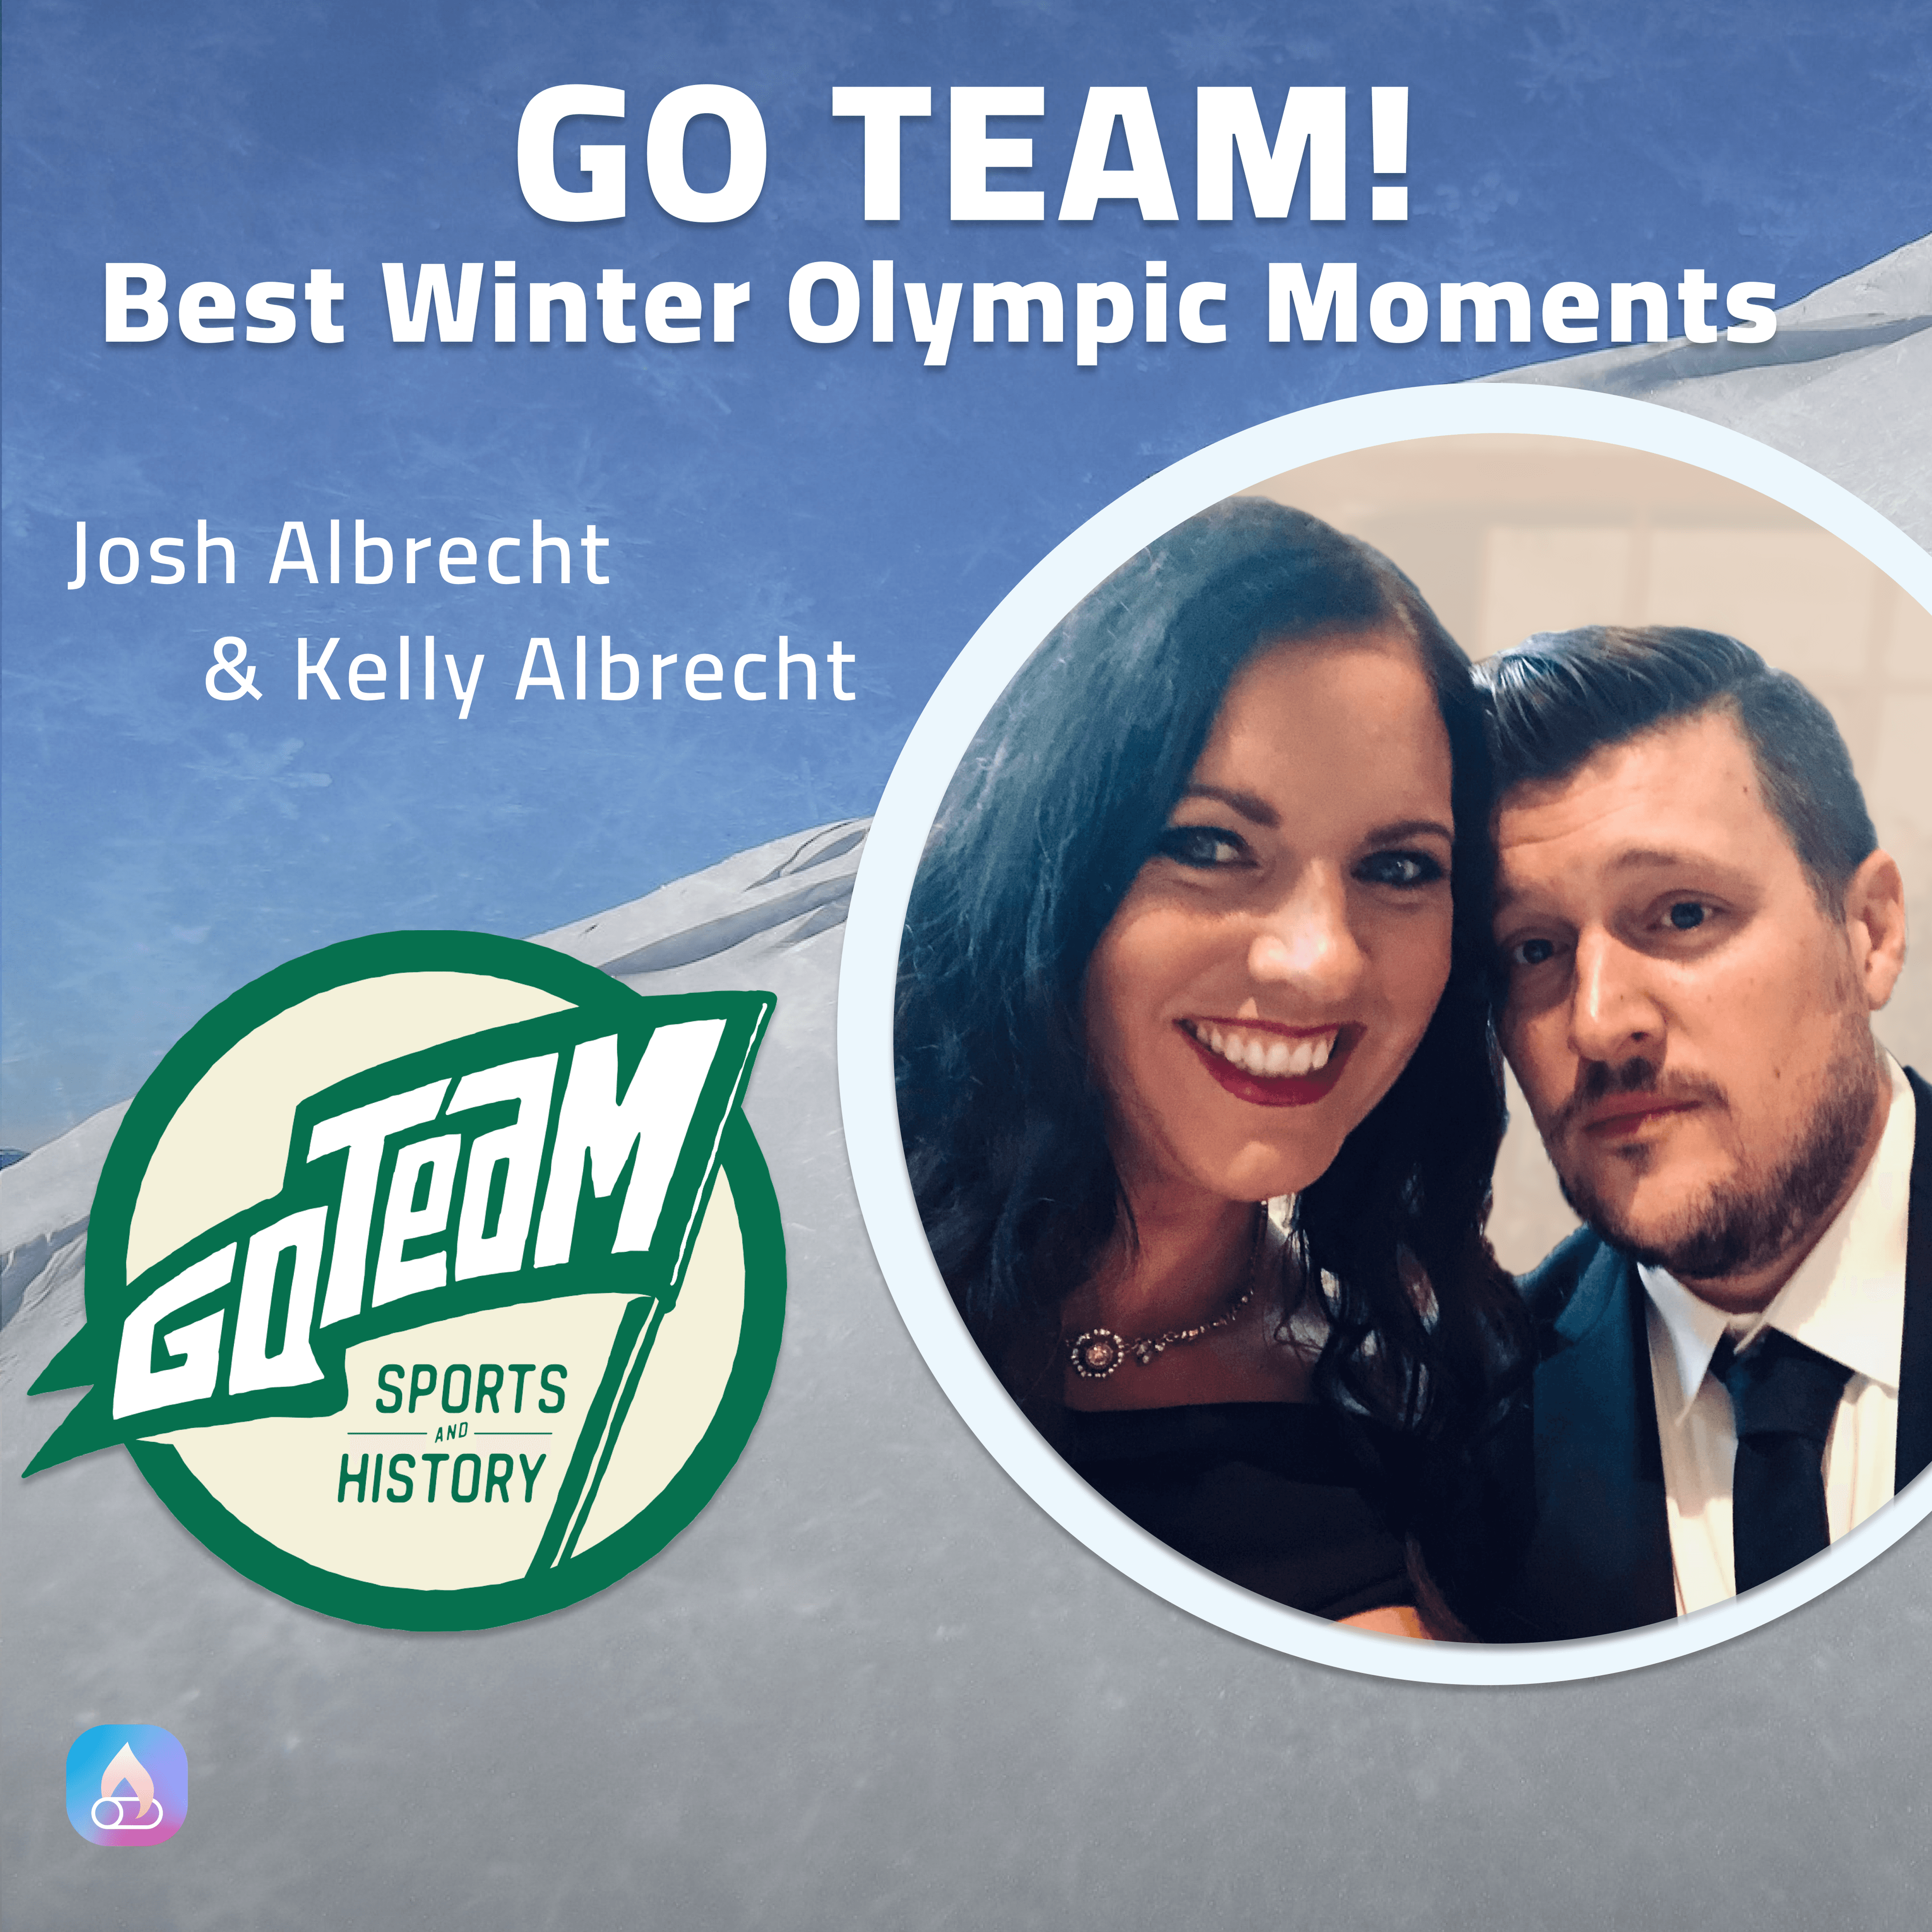 Go Team! Best Winter Olympic Moments